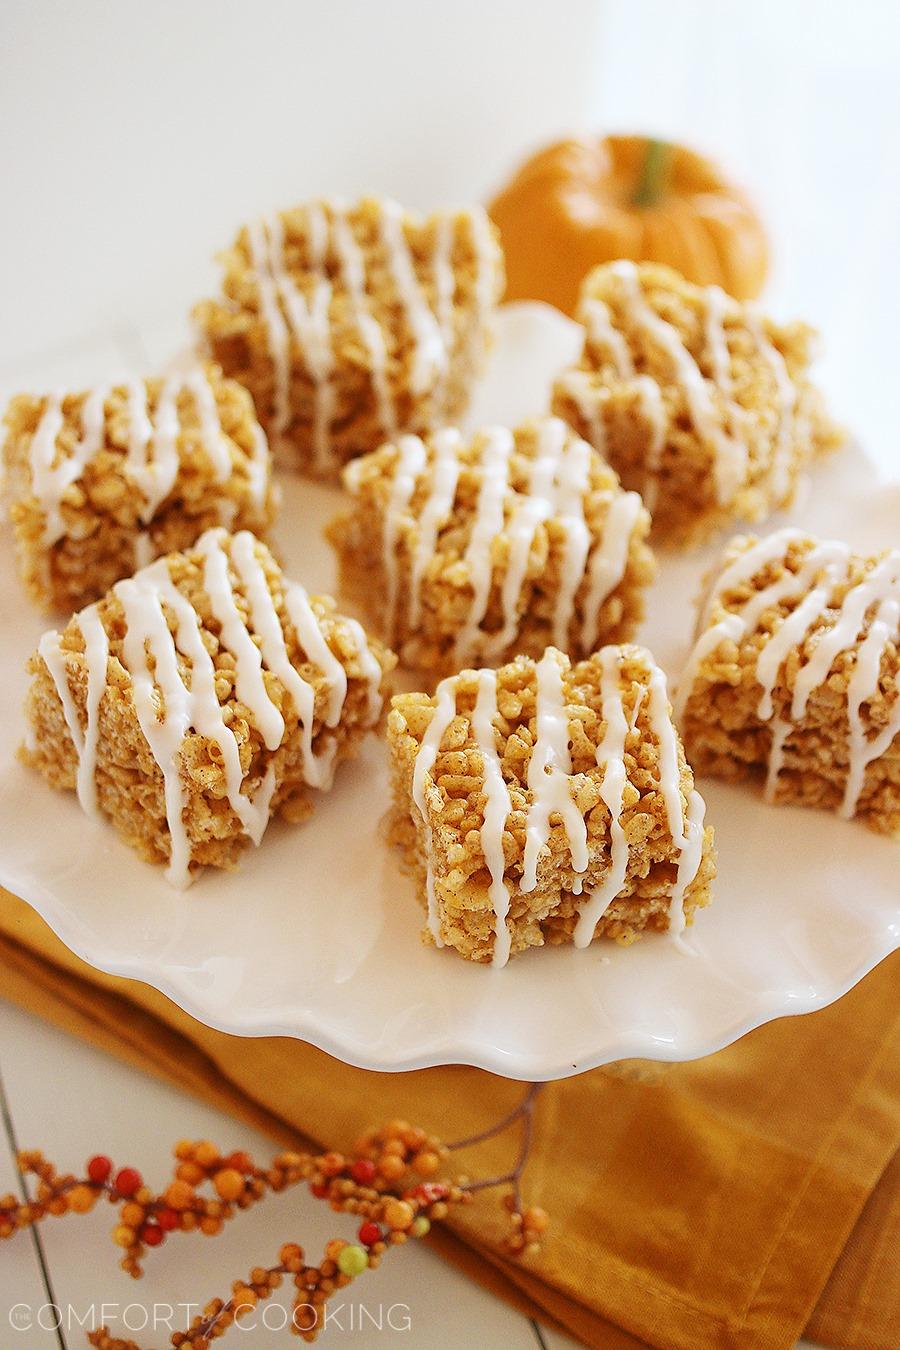 Pumpkin Spice Rice Krispie Treats – Soft & chewy pumpkin spiced treats with a white chocolate drizzle. Perfect for fall parties! | thecomfortofcooking.com